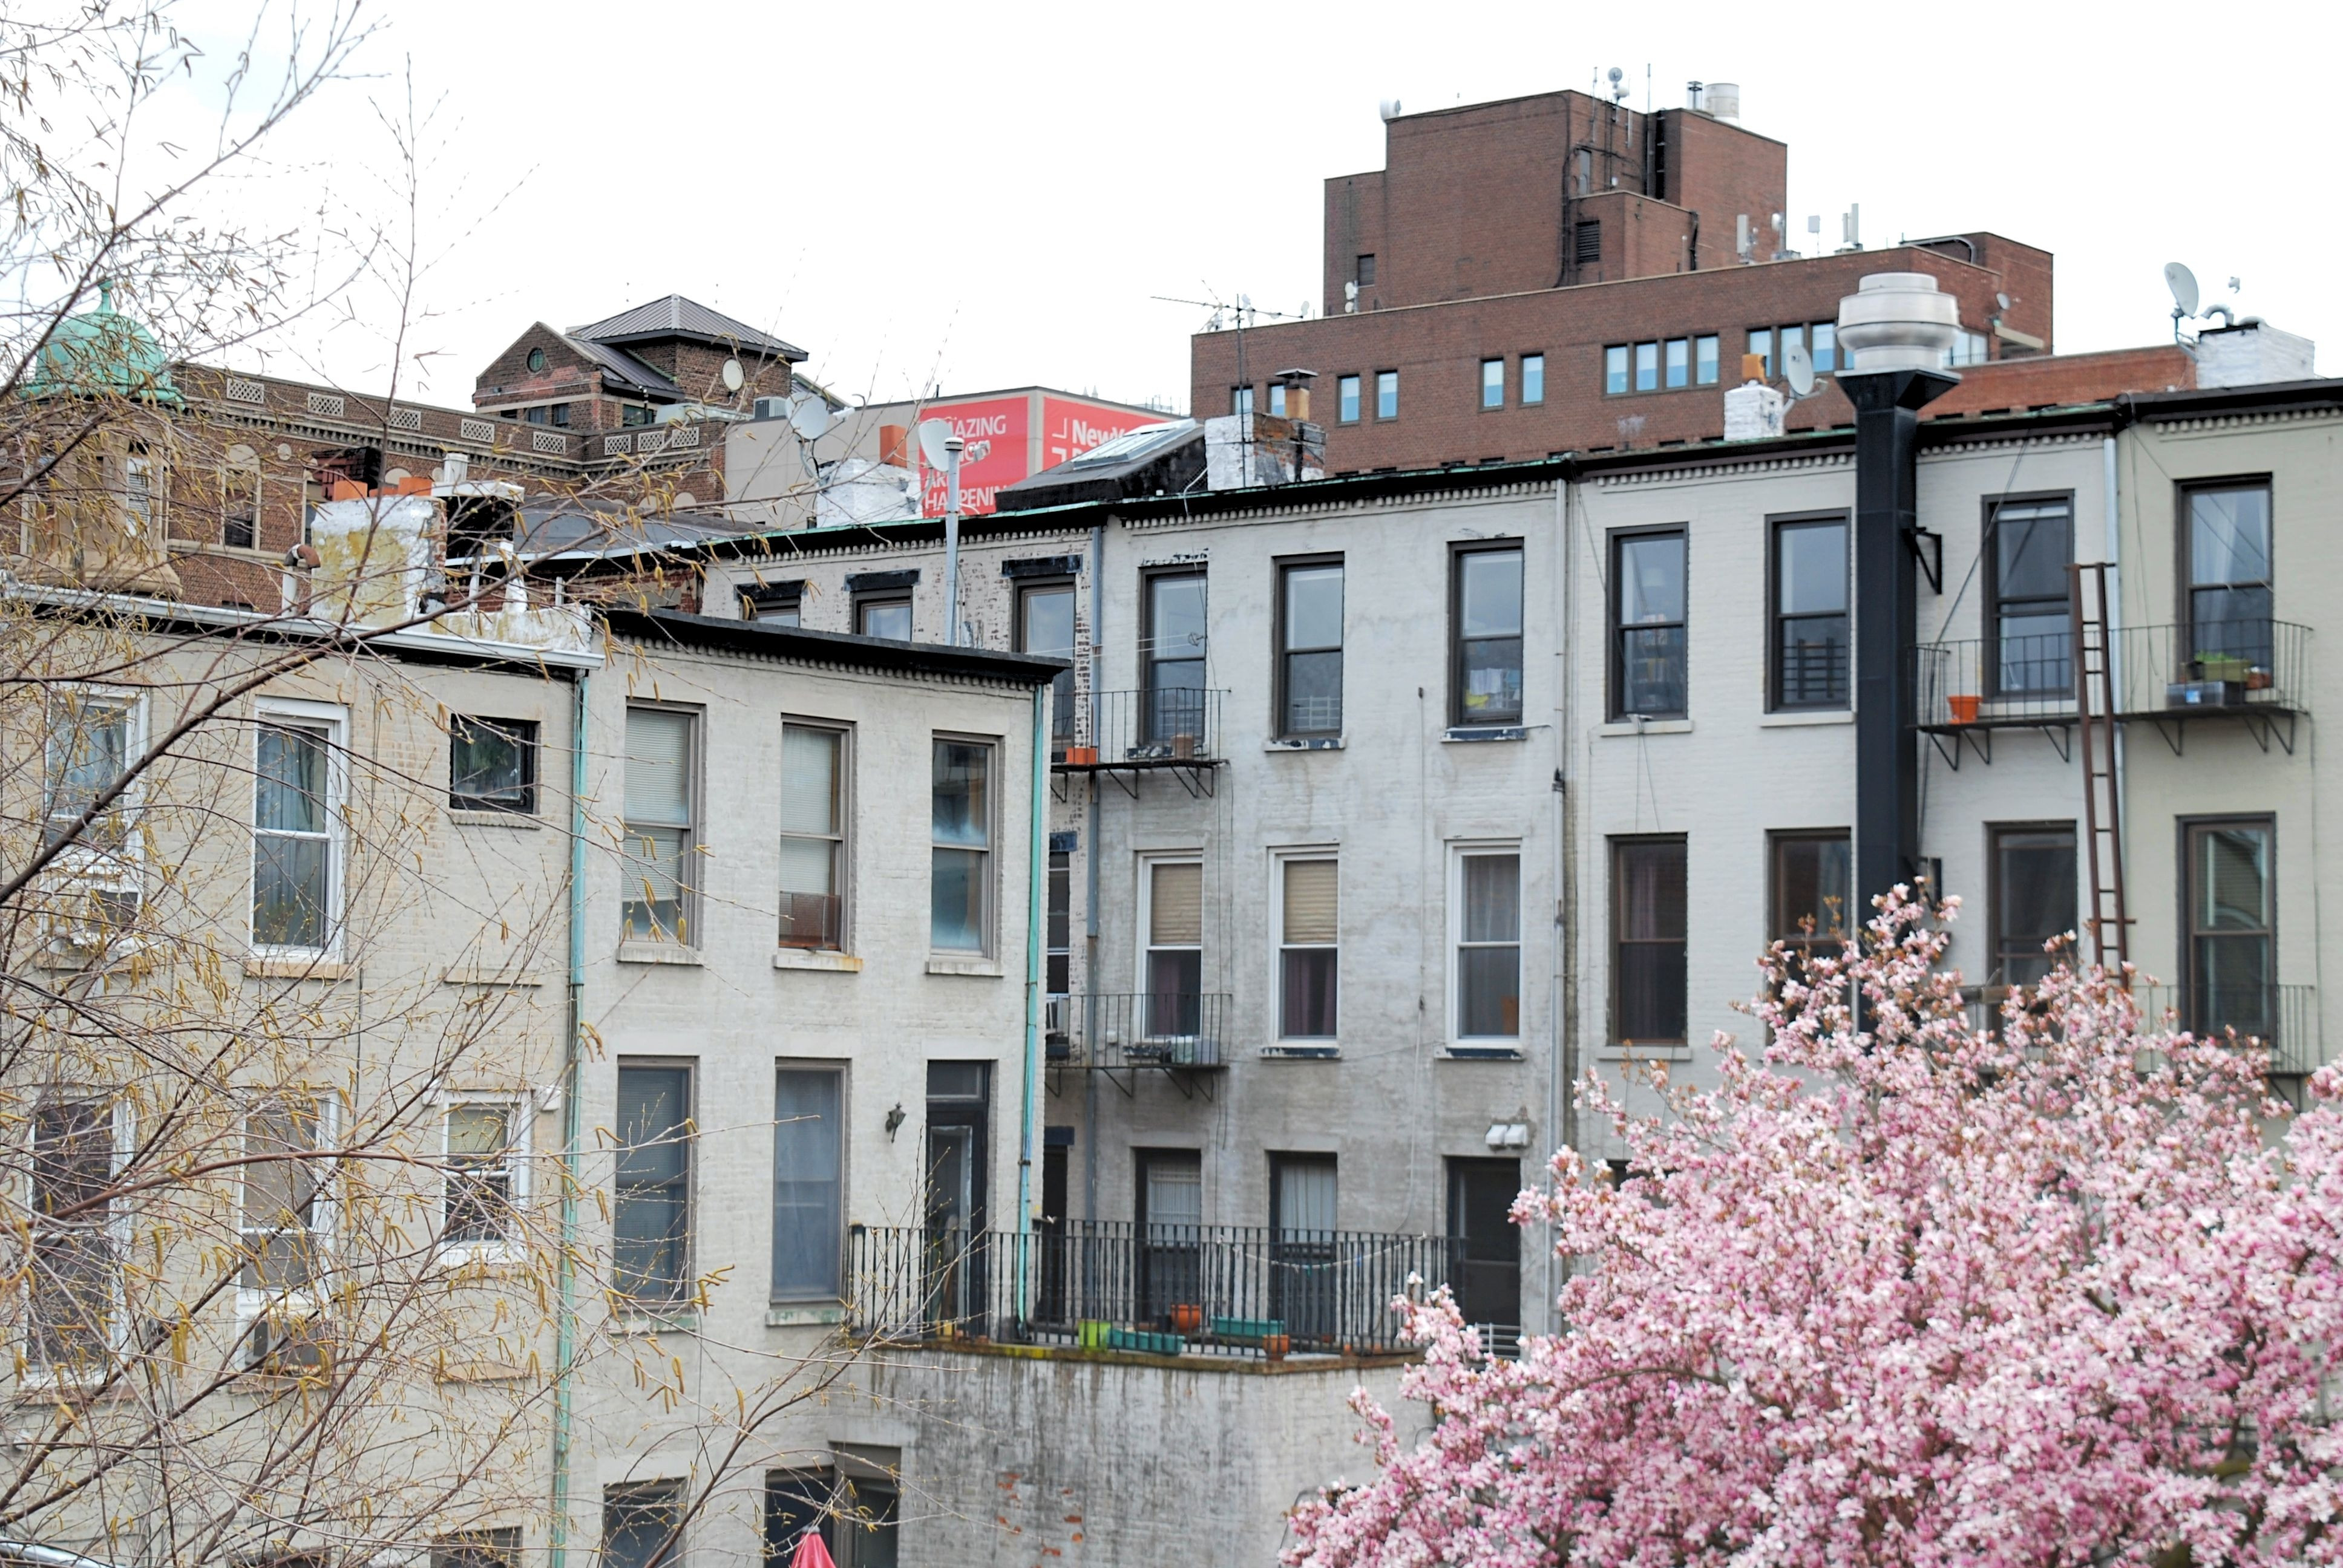 I'm a Real Estate Agent: Here Are the 5 Best Cities for Spring